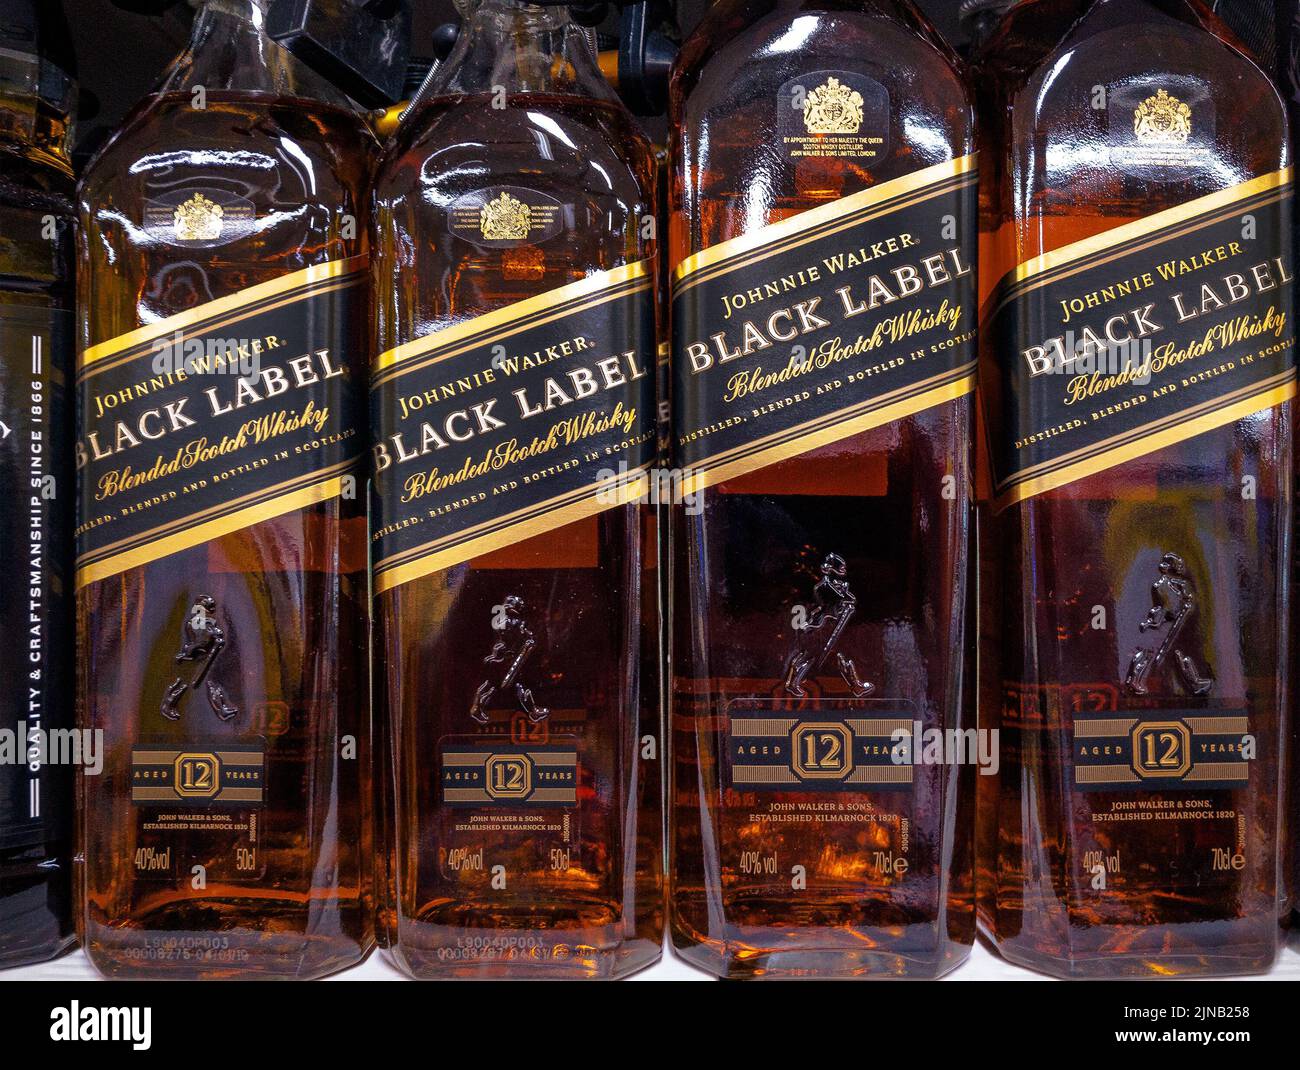 2019: the 12 years aged blended scotch whisky Johnie Walker (R) Black Label, bottles at sale Stock Photo